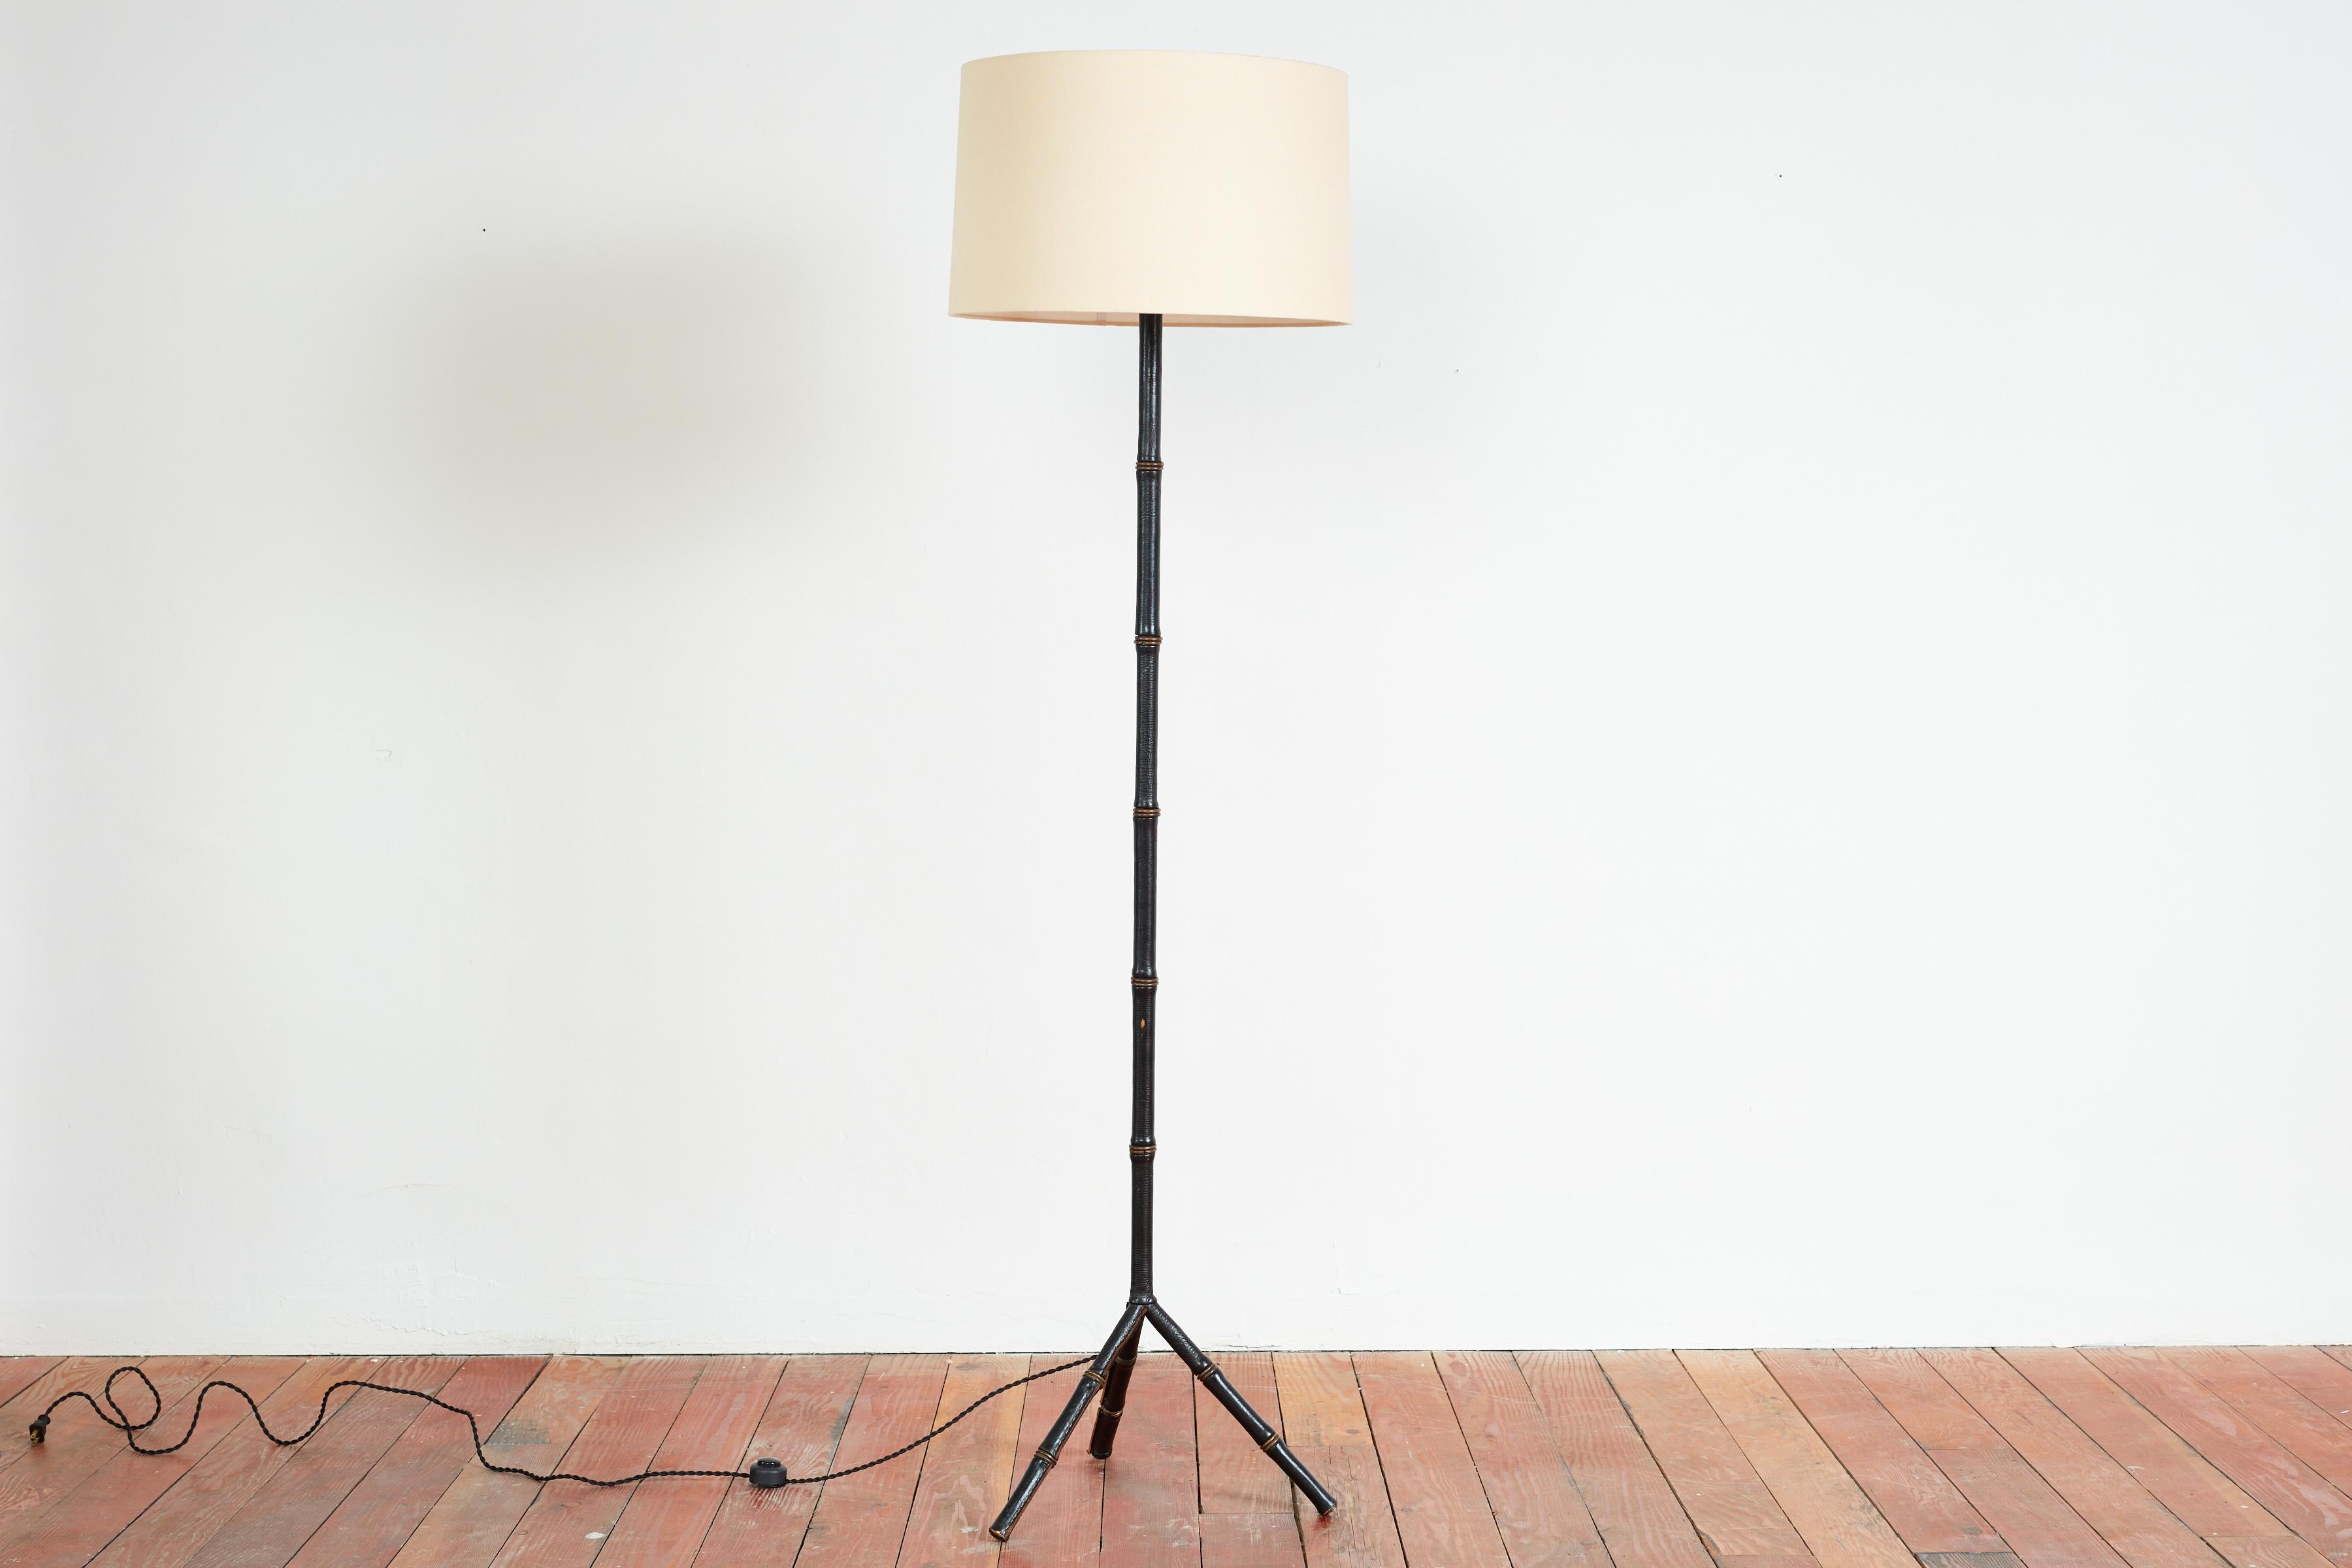 Jacques Adnet Floor Lamp with tripod base - France, 1940s
Signature leather bamboo stem 
New silk shade 
Tall and substantial in size and scale.